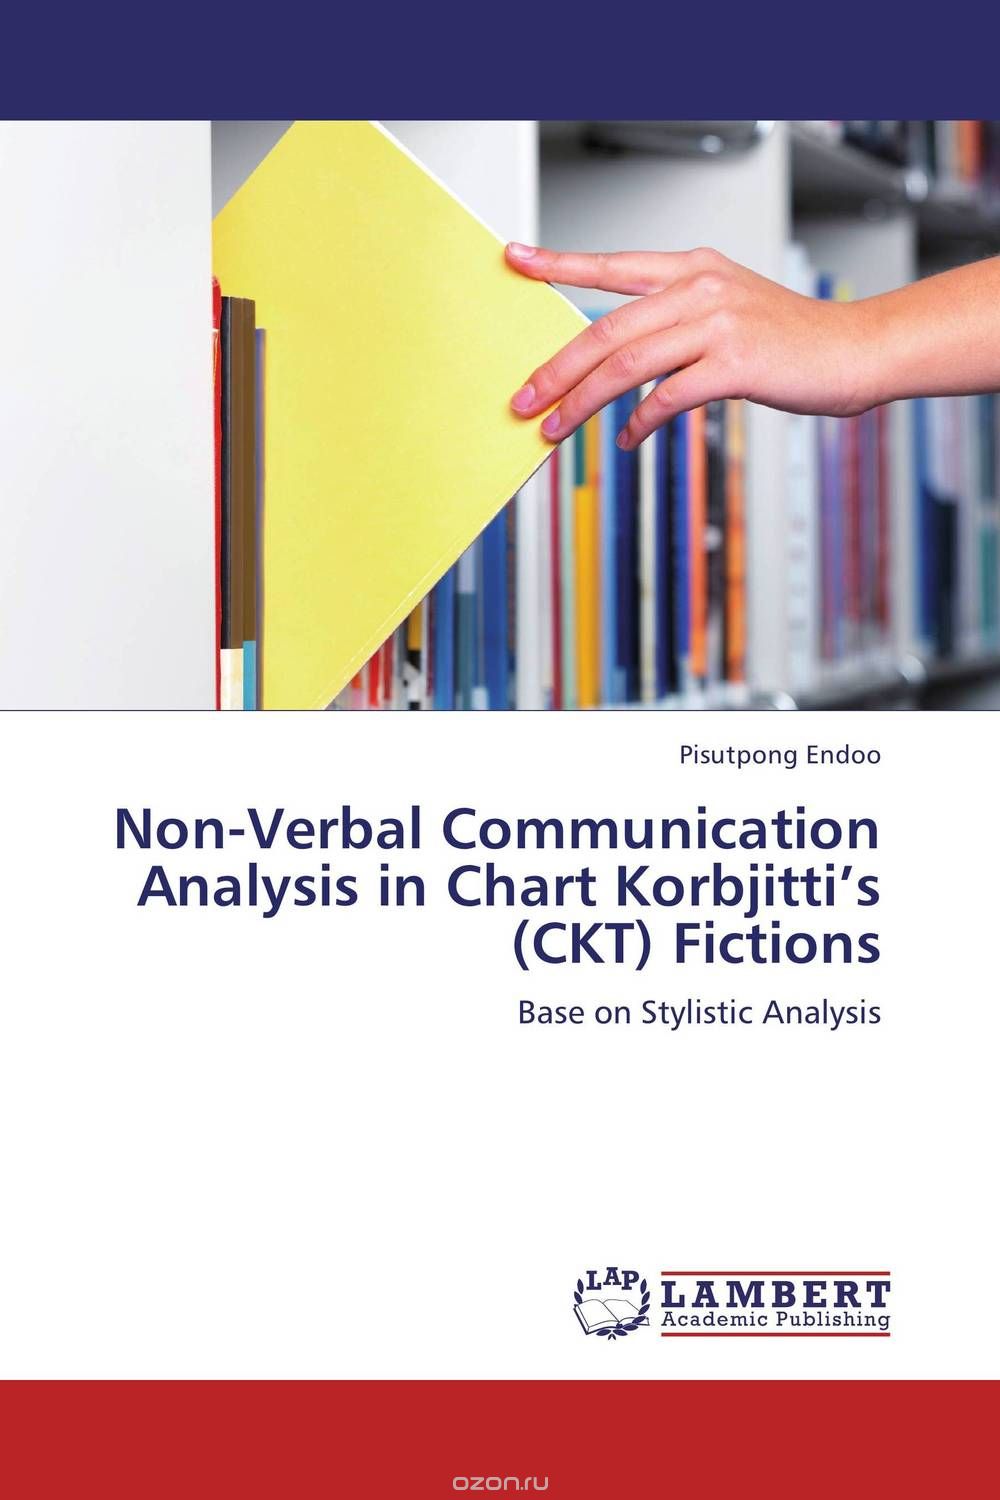 Non-Verbal Communication Analysis in Chart Korbjitti’s (CKT) Fictions